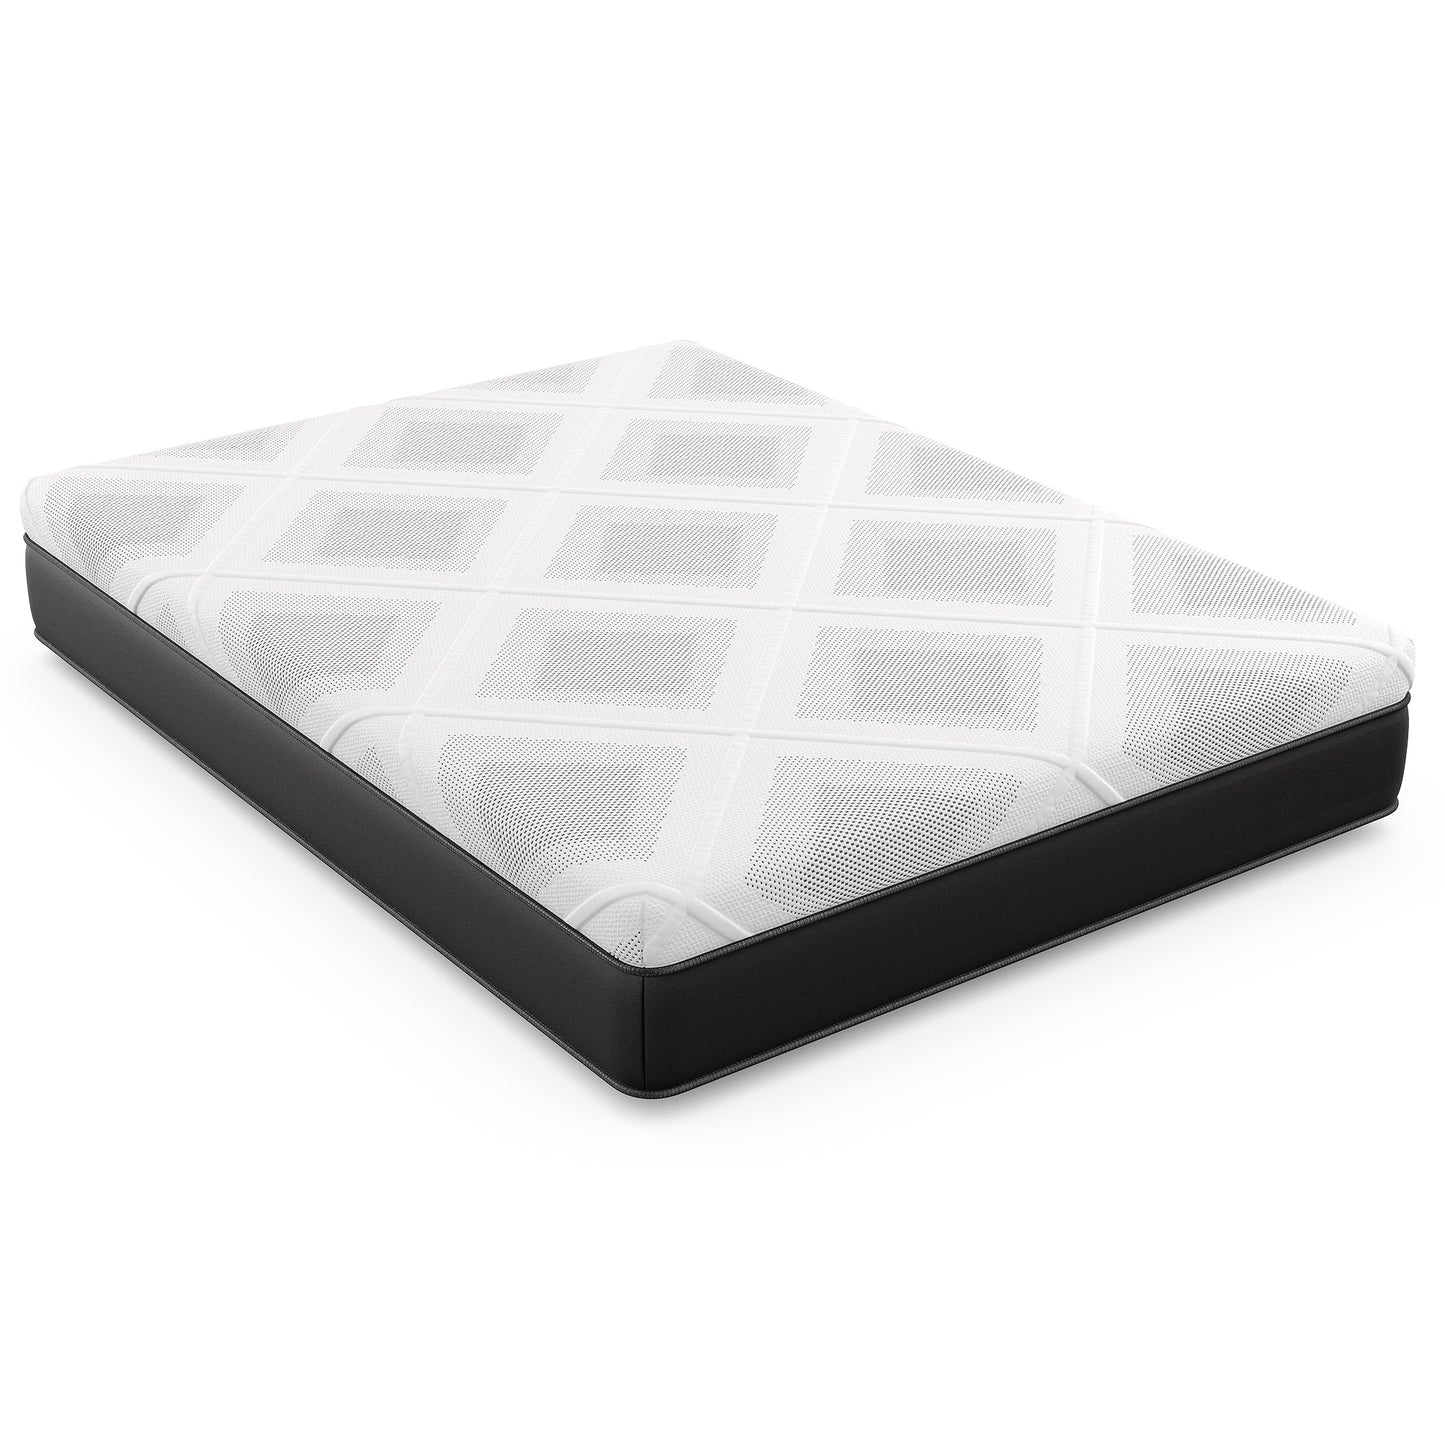 Response Mattress Copper Infused Foam Cooling - Firm